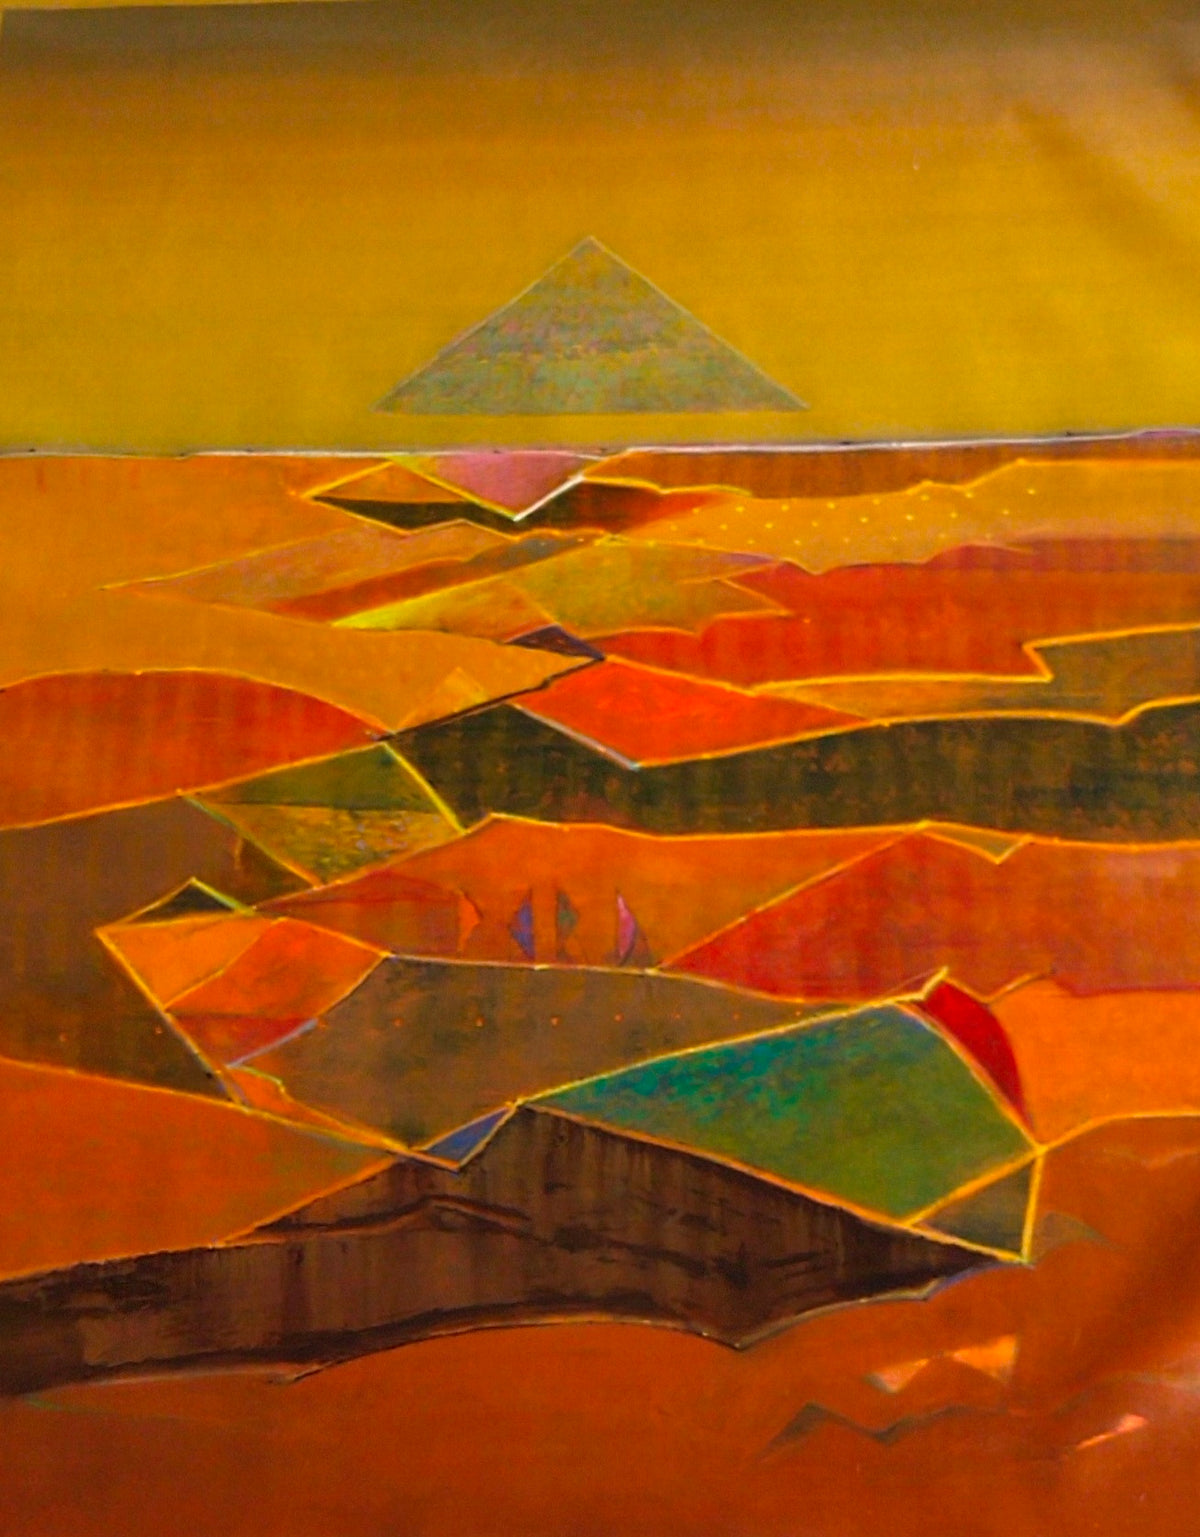 A beautiful abstract landscape artwork by Sanjay tikkal in ochre yellow and burnt orange hues.